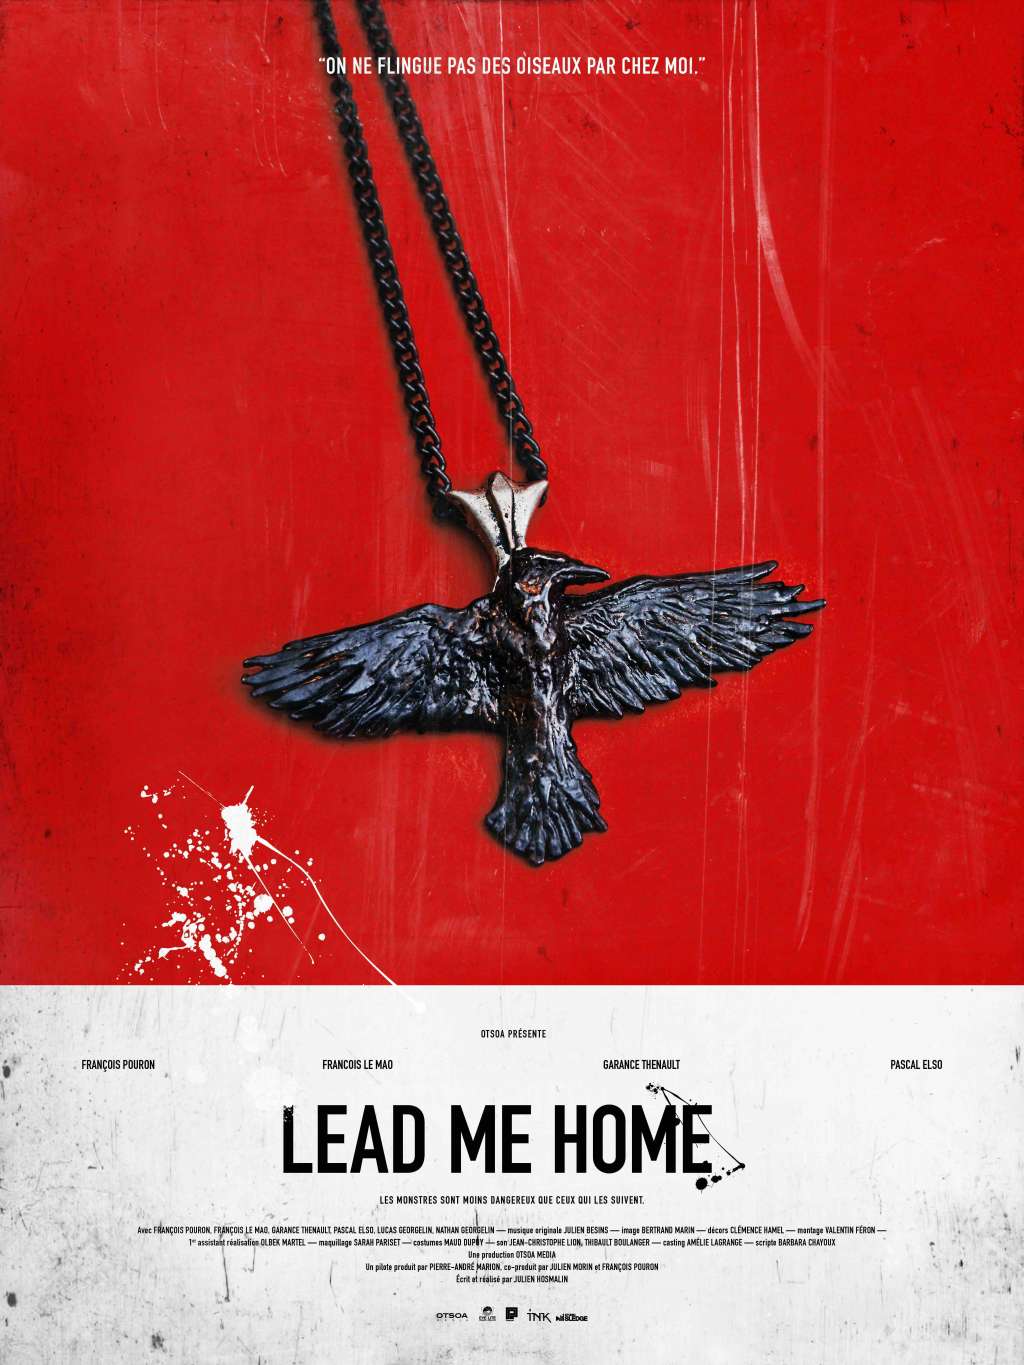 Is Lead Me Home on Netflix